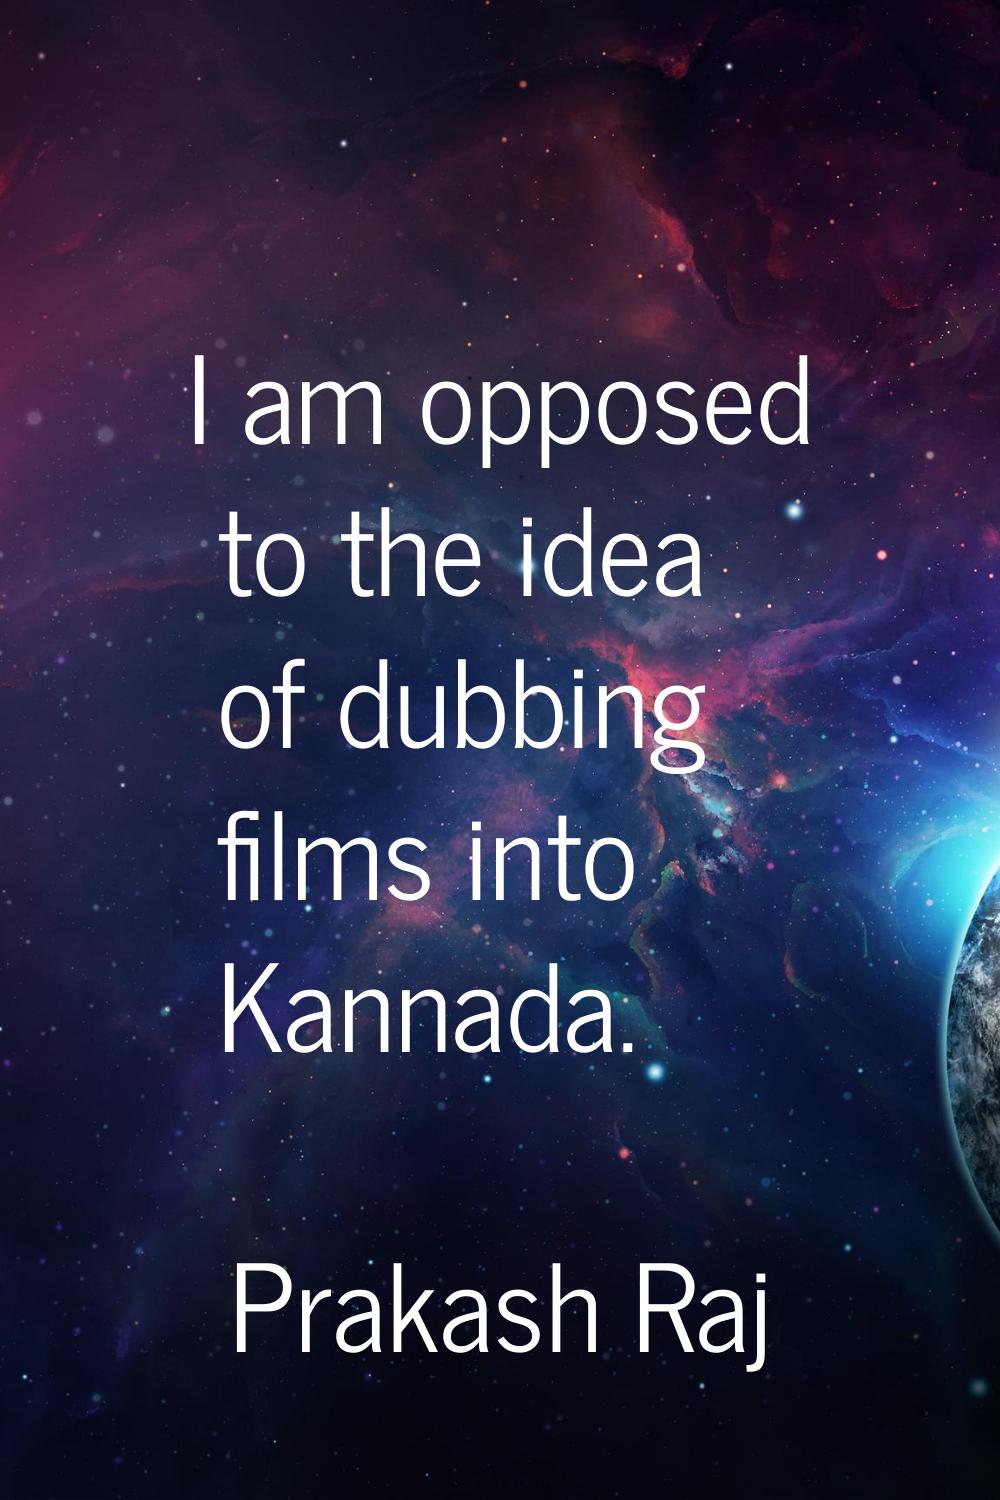 I am opposed to the idea of dubbing films into Kannada.